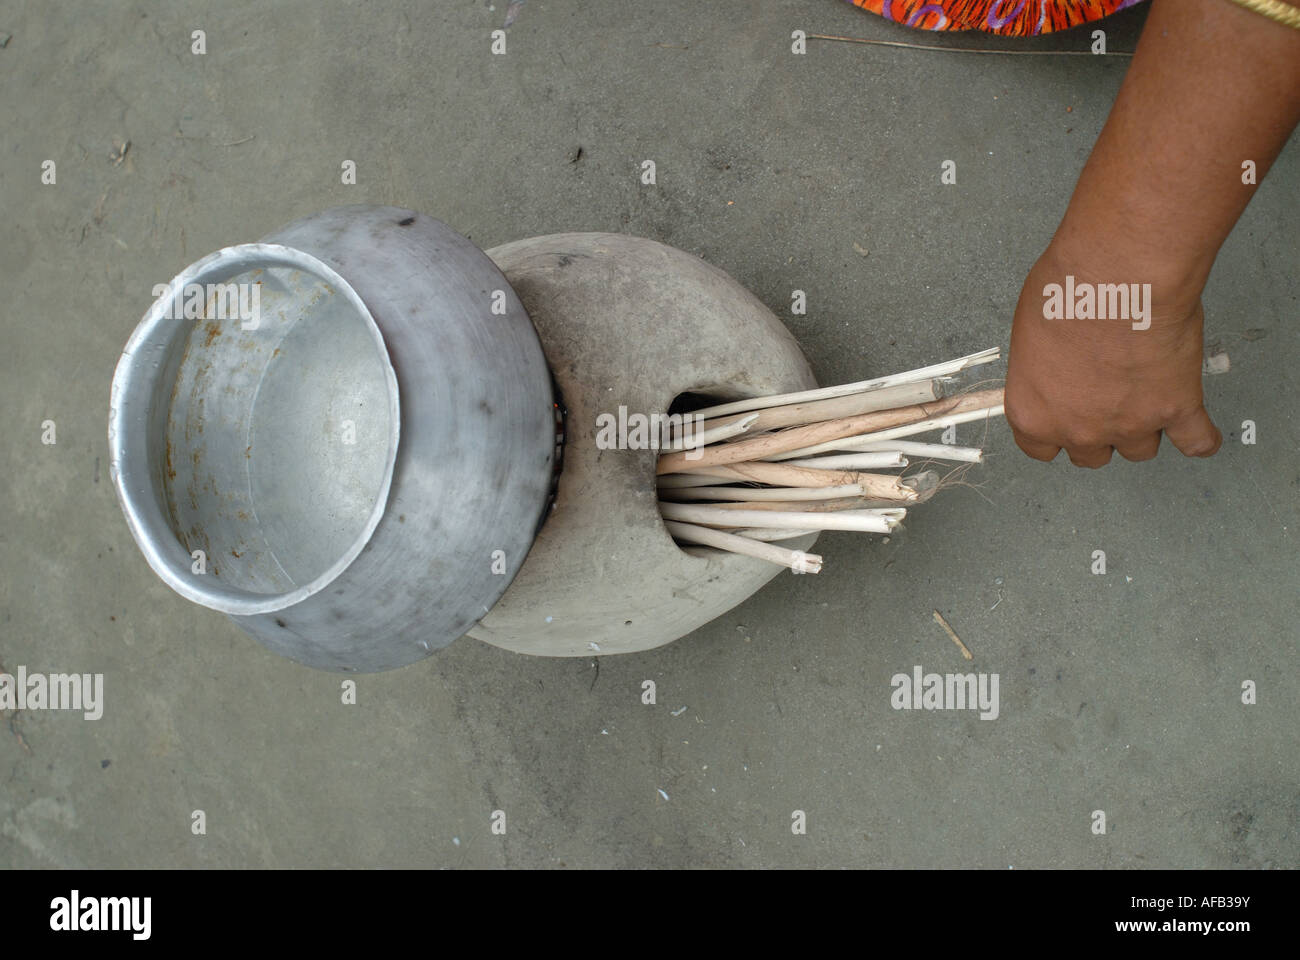 Flood affected north Bangladesh 2007.Boiling water on a special portable stove developed for use in emergency situations. Stock Photo